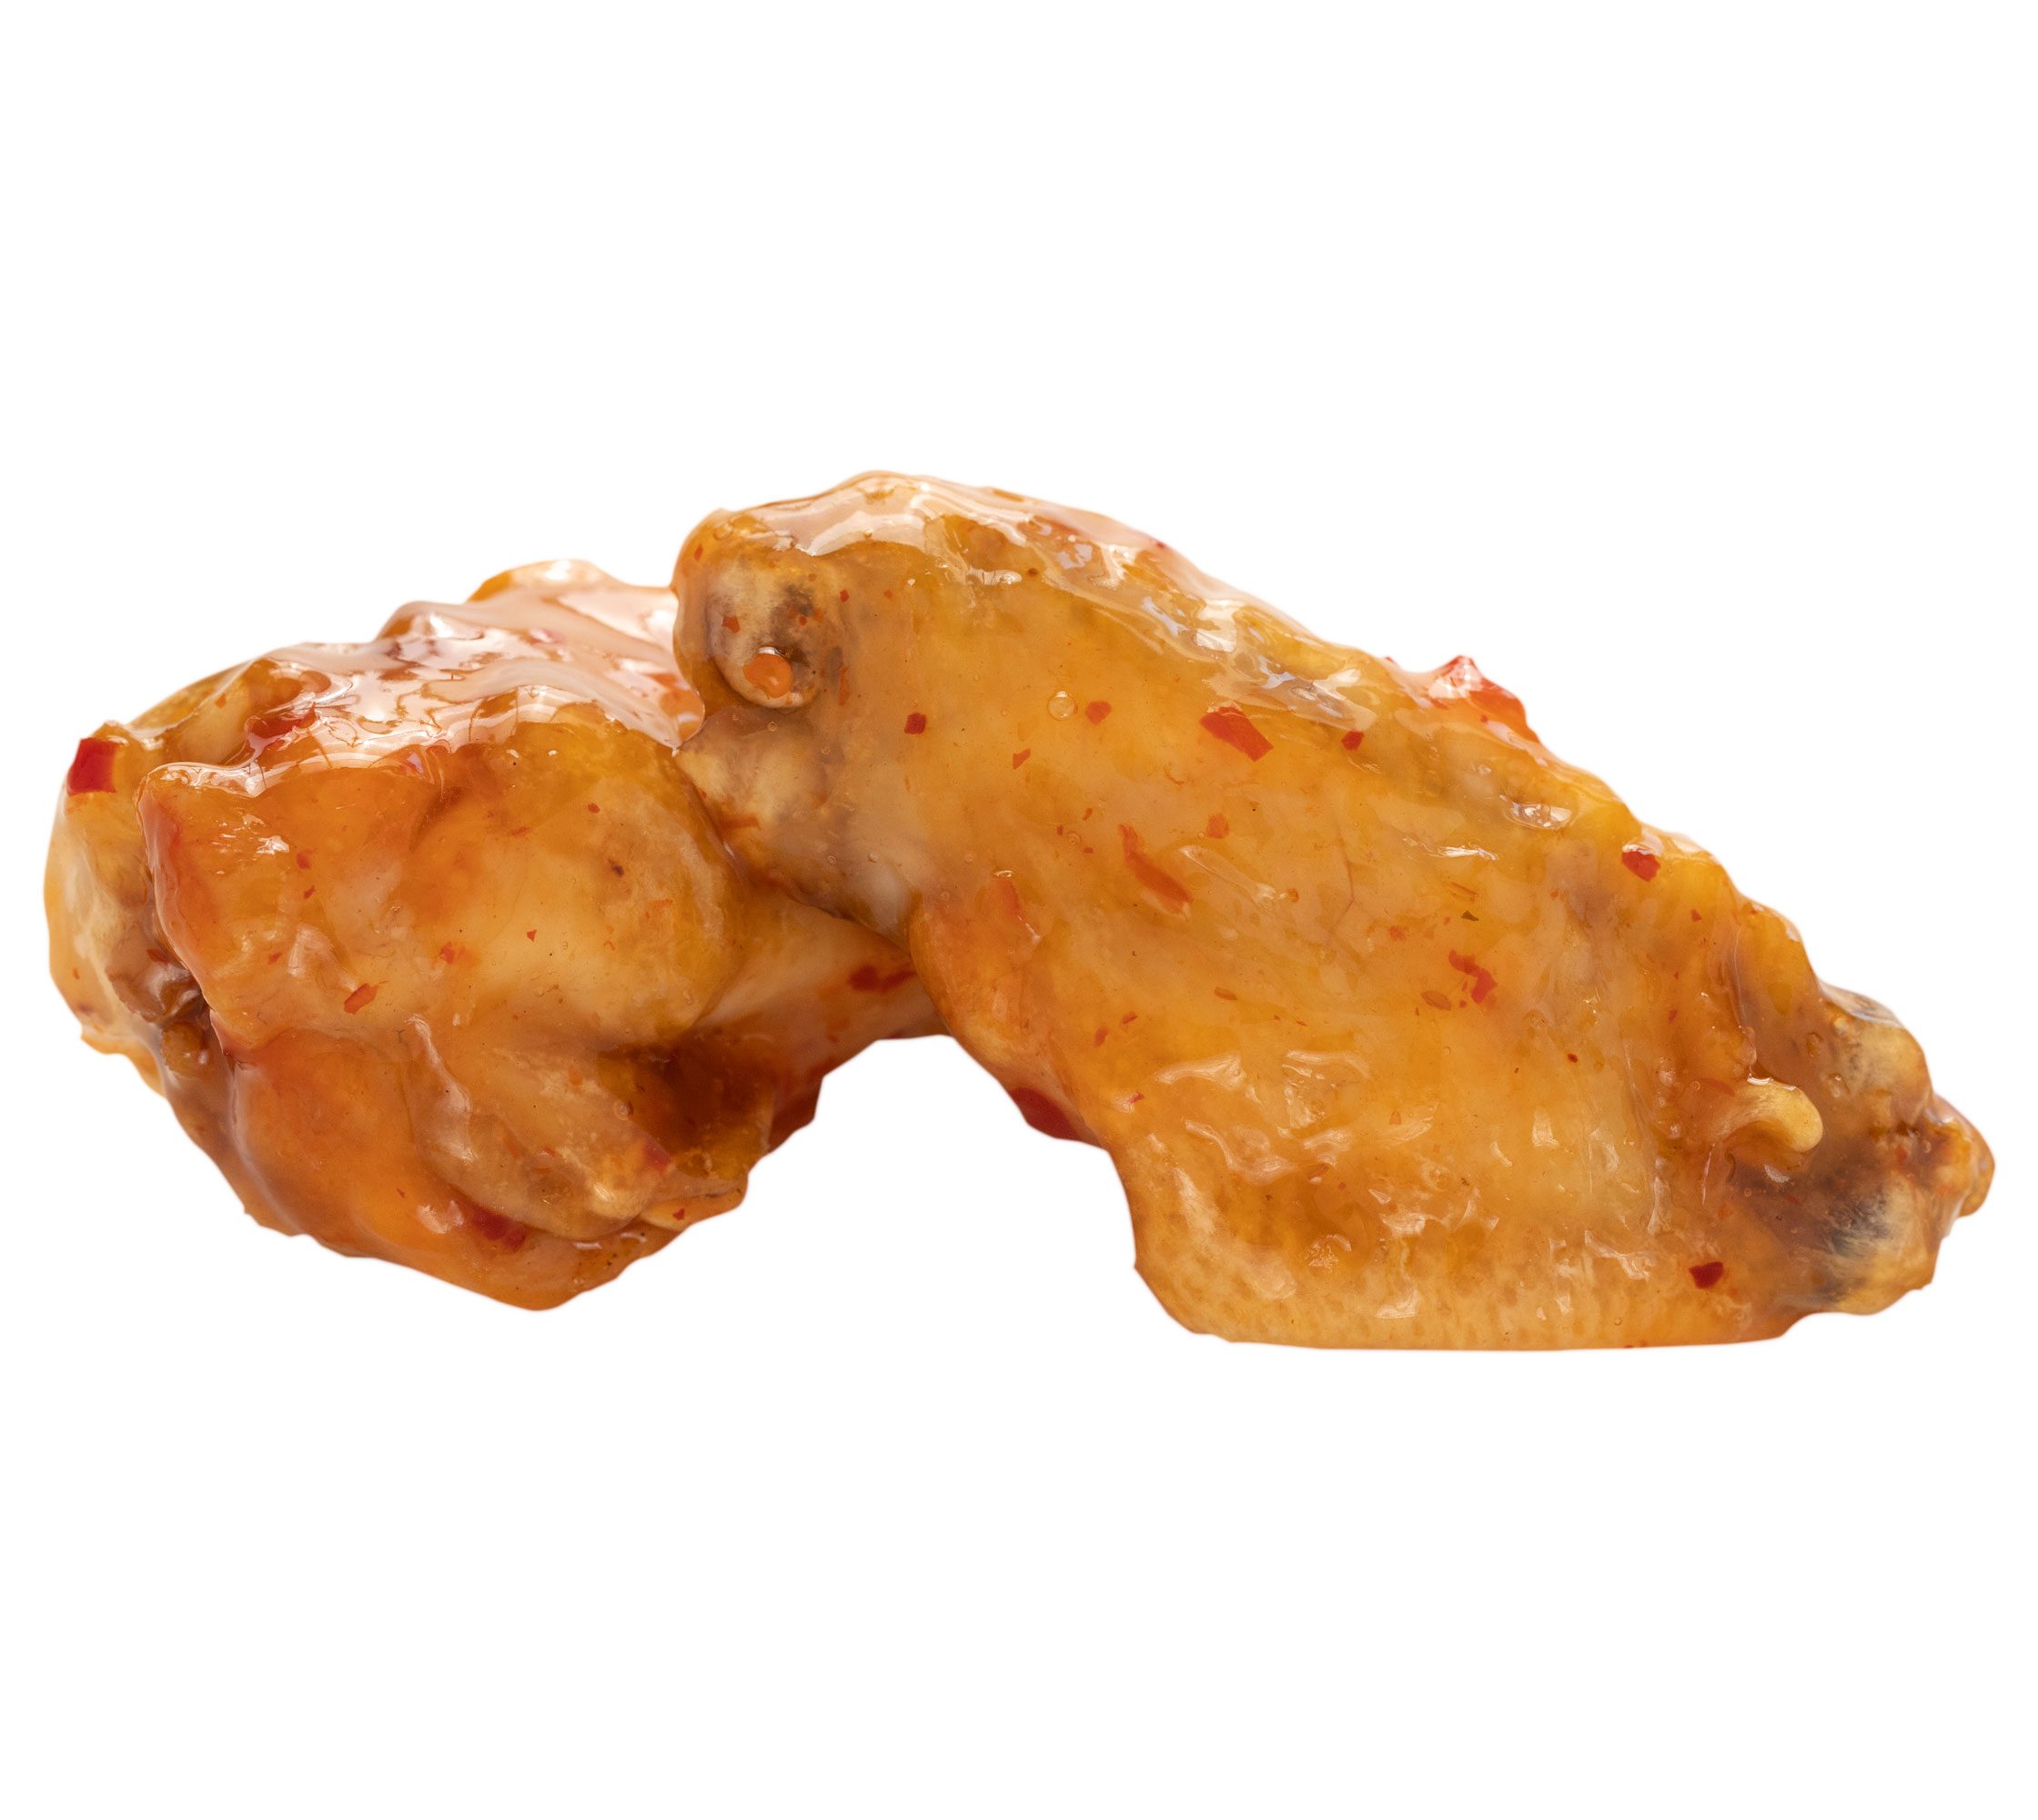 Chicken wing with sweet chili sauce